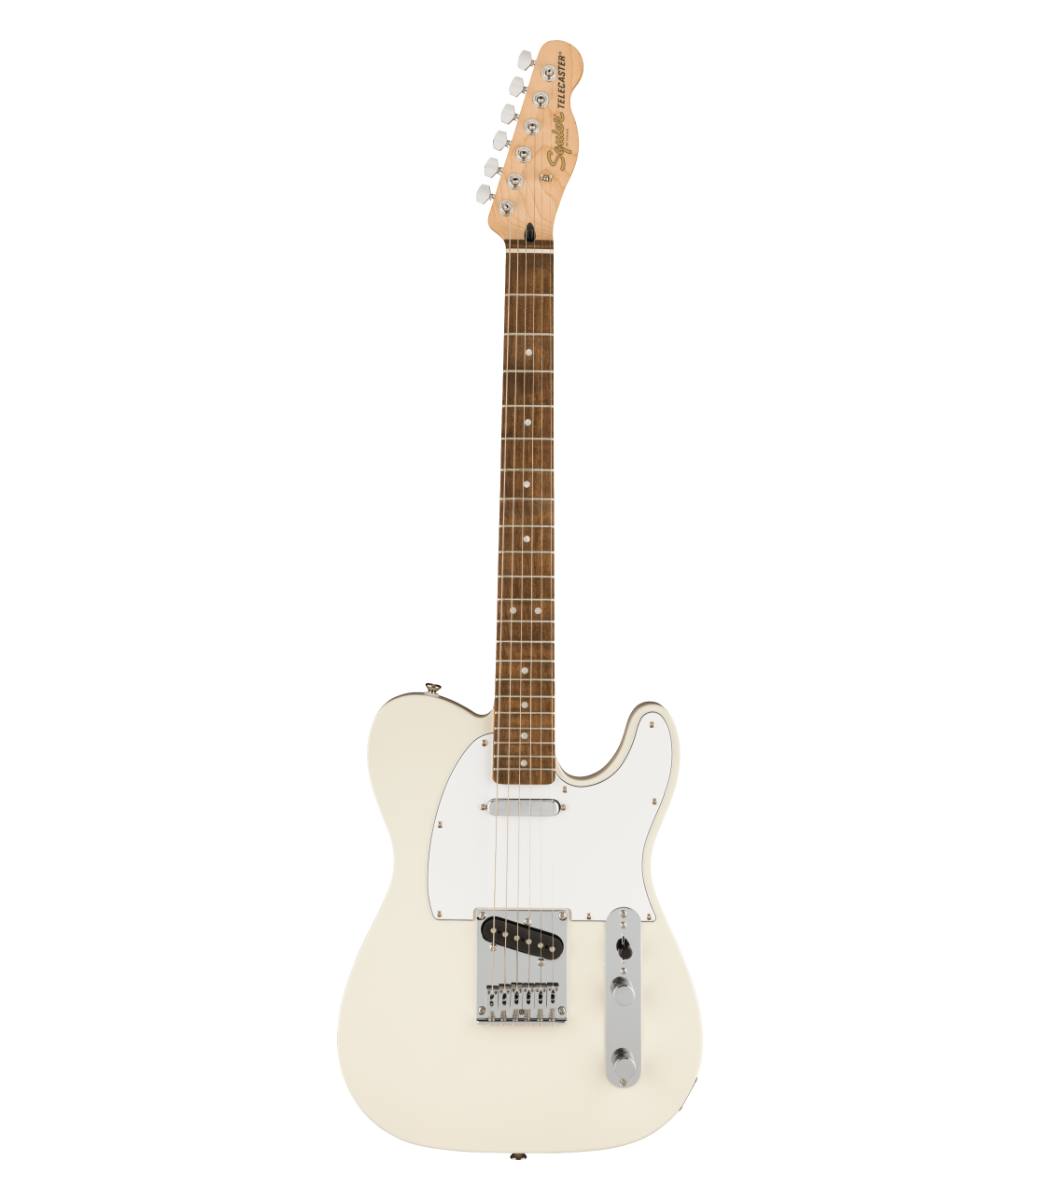 Squier Affinity Telecaster - Laurel Fretboard, Olympic White